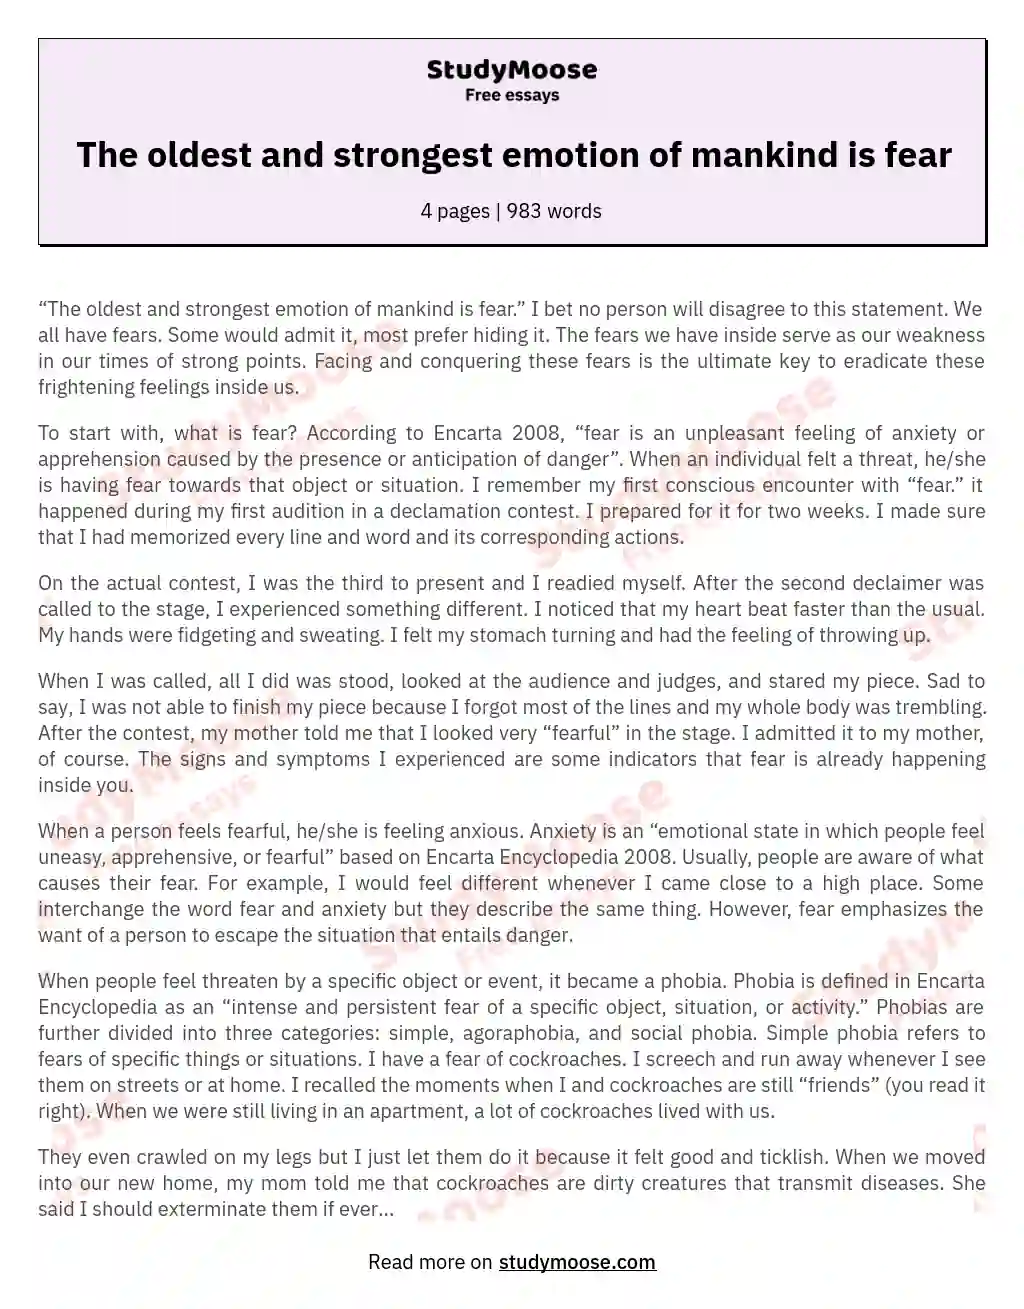 The oldest and strongest emotion of mankind is fear